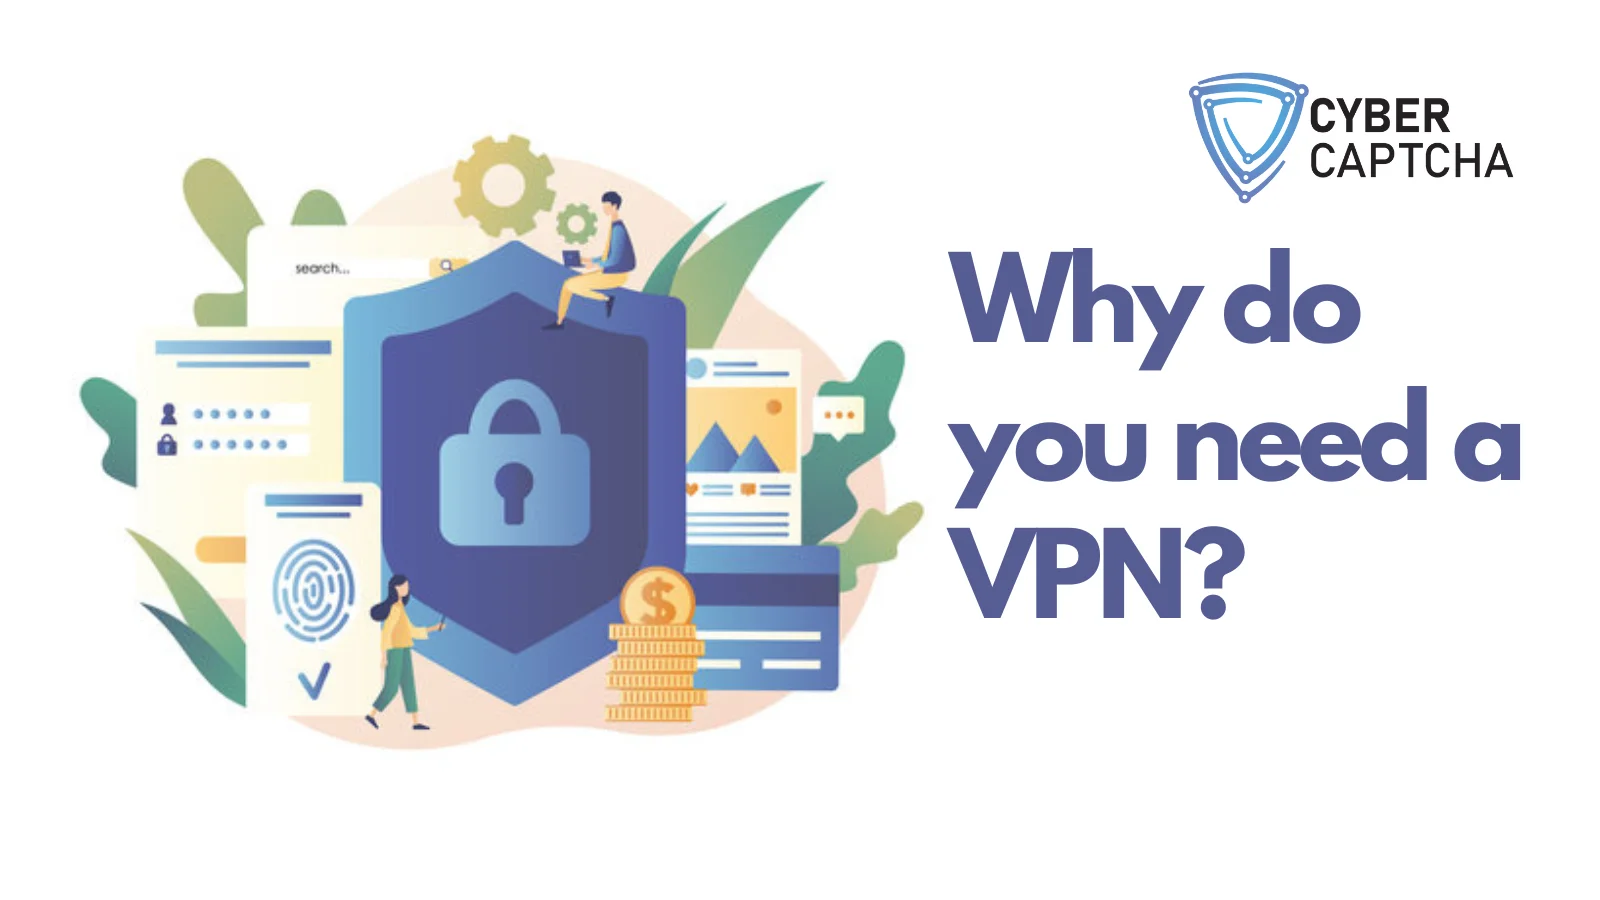 Why do you need a VPN